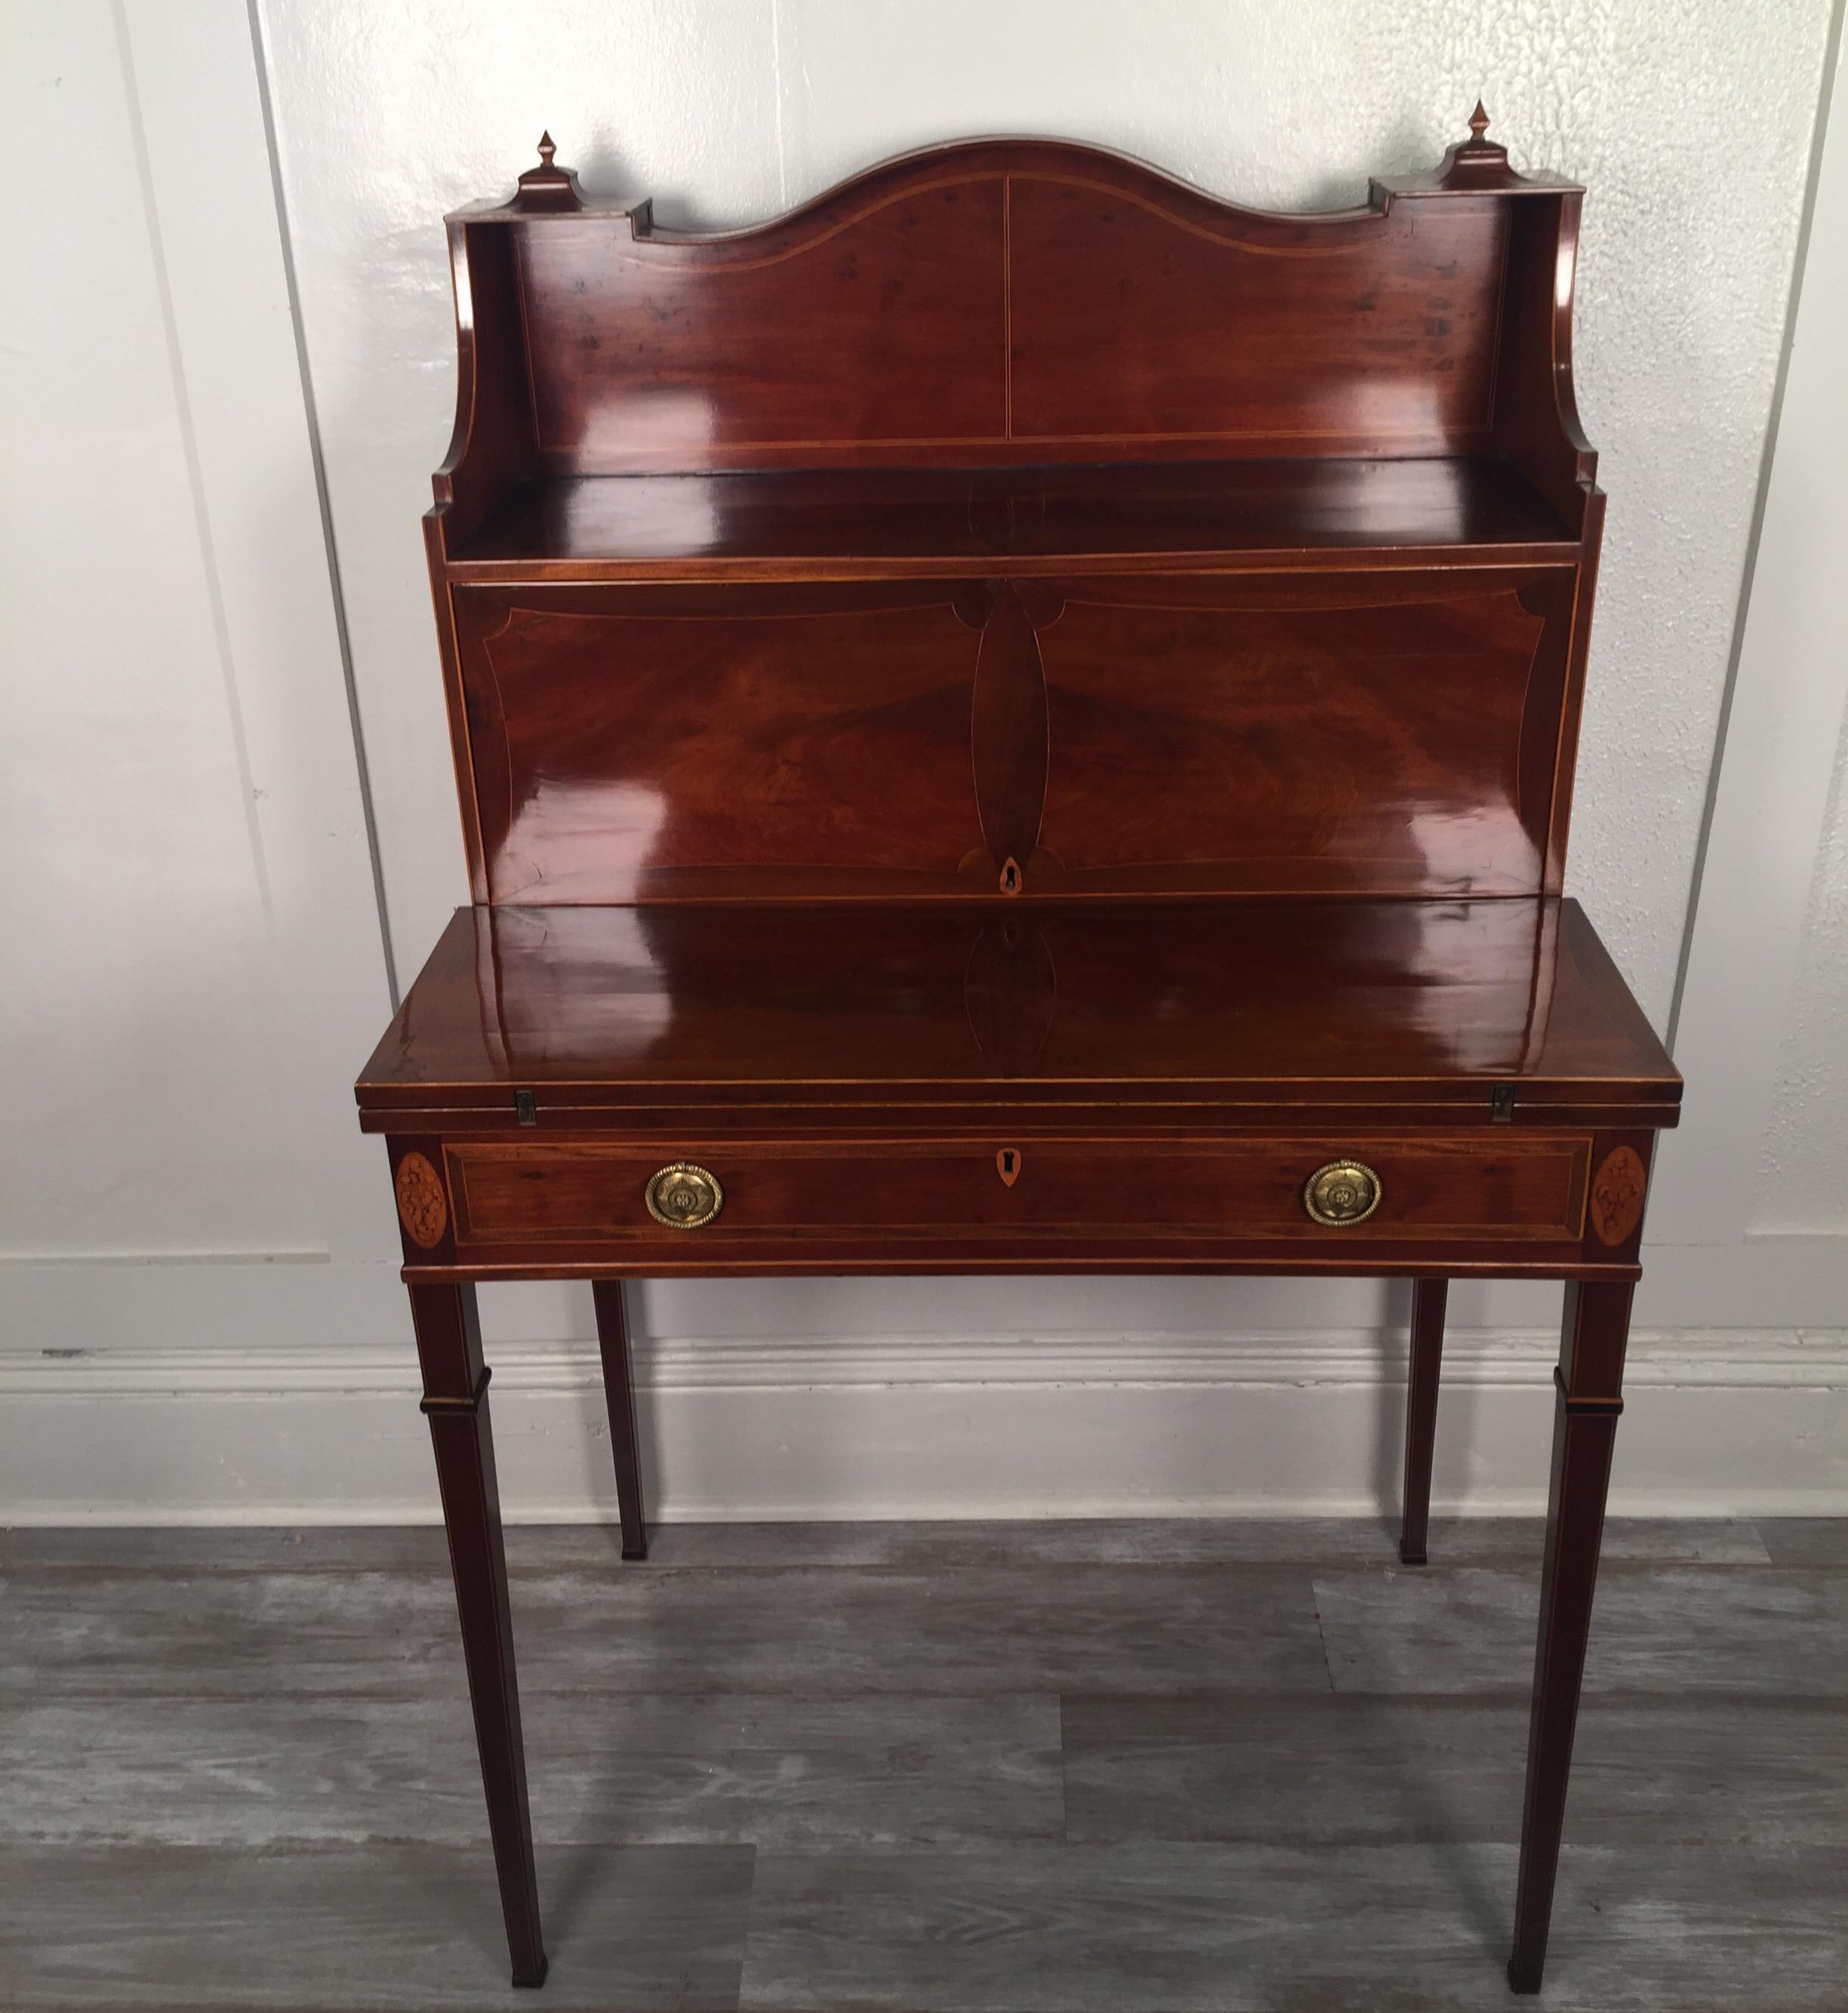 A small scale mahogany and satinwood inlaid desk. The top with display surface with a concealed section of small drawers. The work surface that flips open with the original leather covering. There is on long drawer at the apron. The desk, resting of